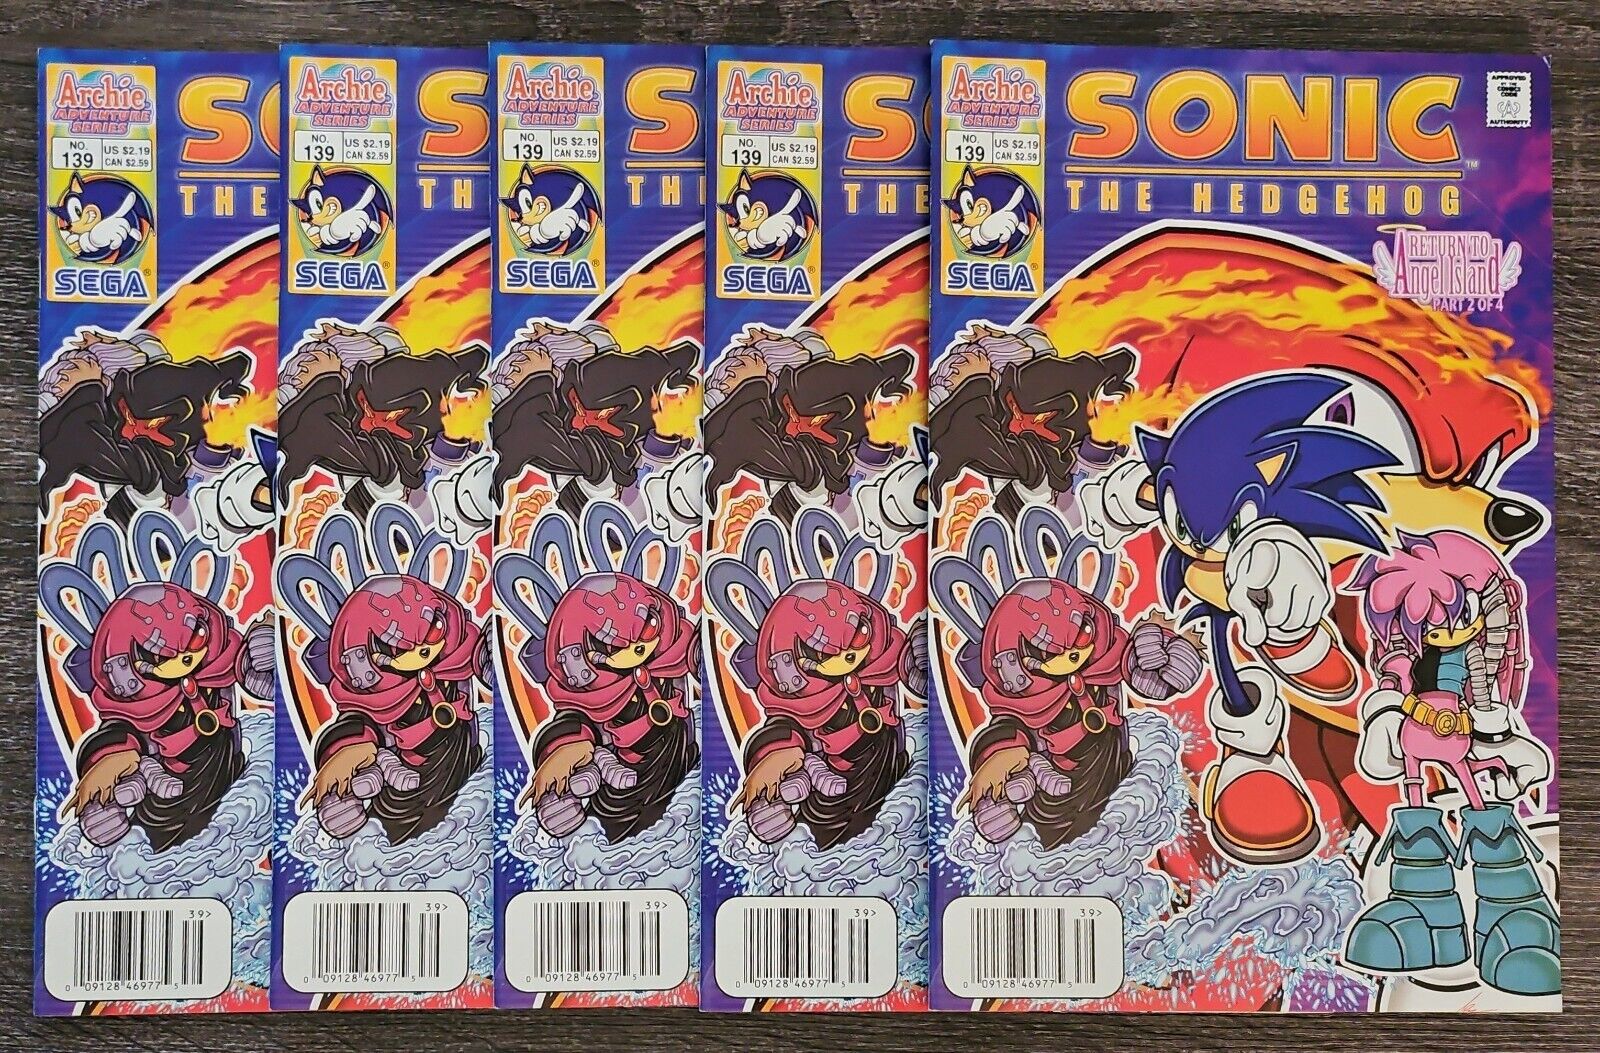 Sonic the Hedgehog #139 (Archie Comics, 2004) - Combo SH Bagged/Boarded